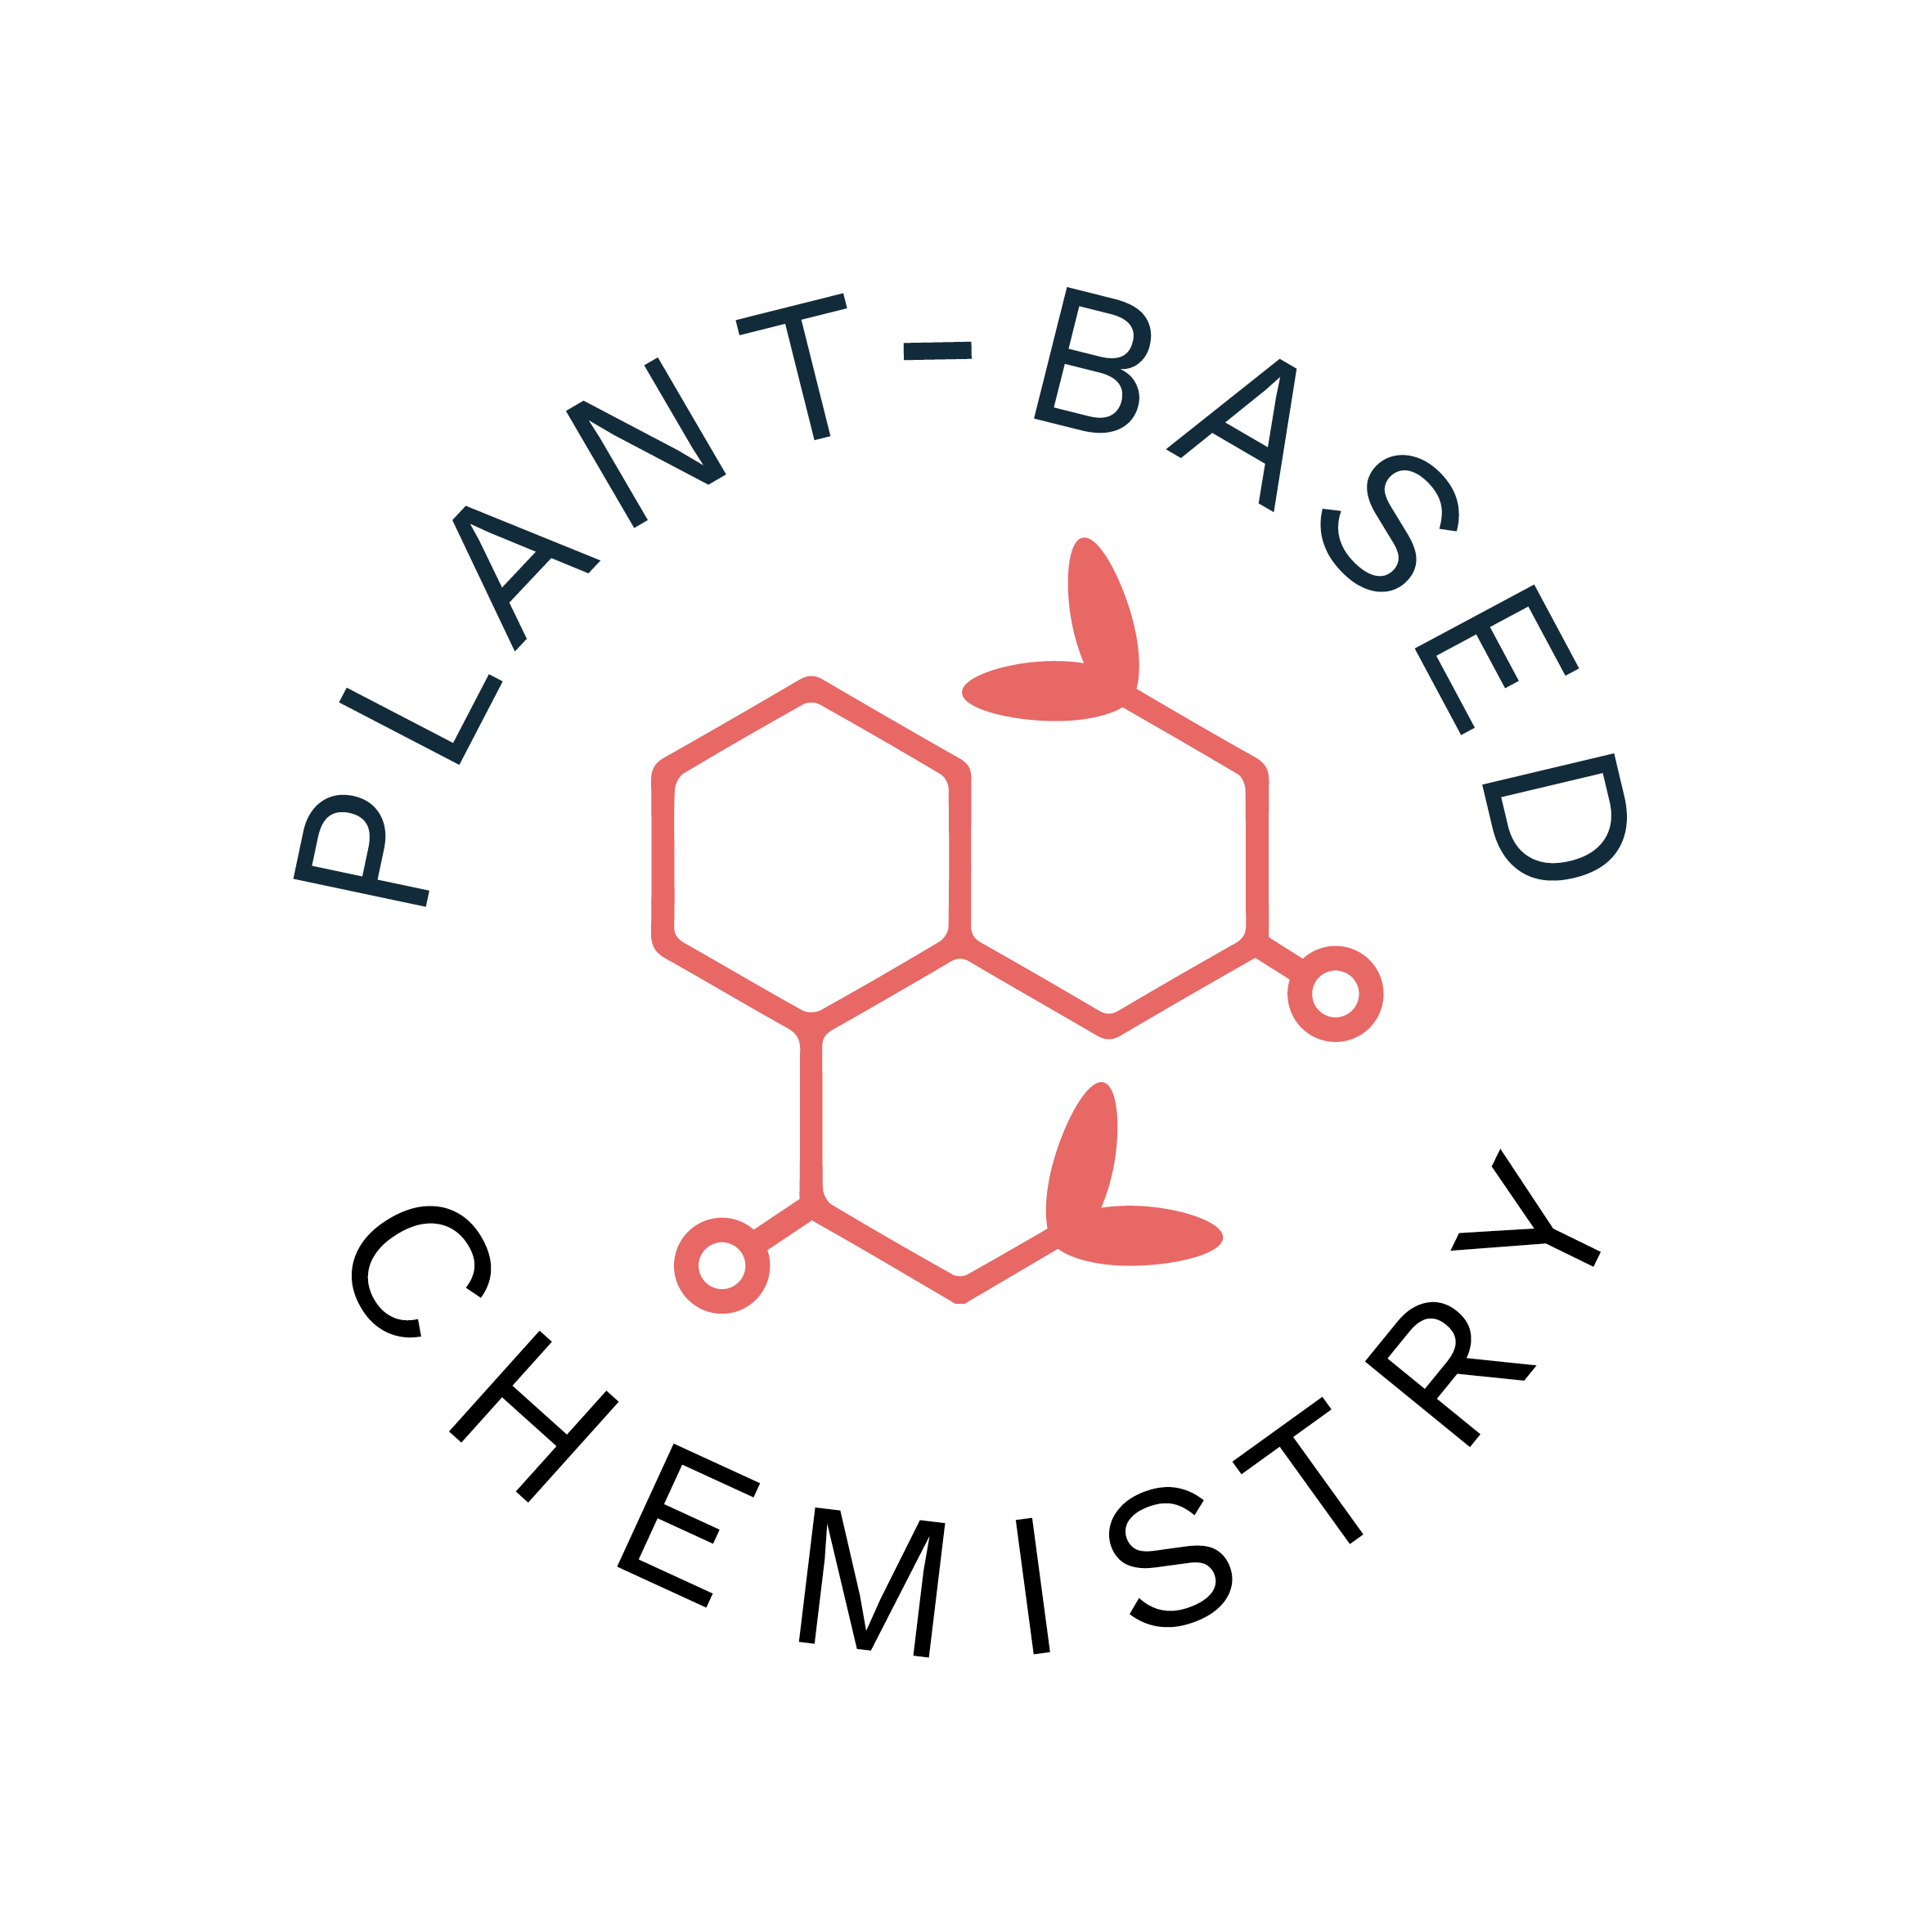 Using plant-based chemistry to create beautiful, natural and effective skincare products